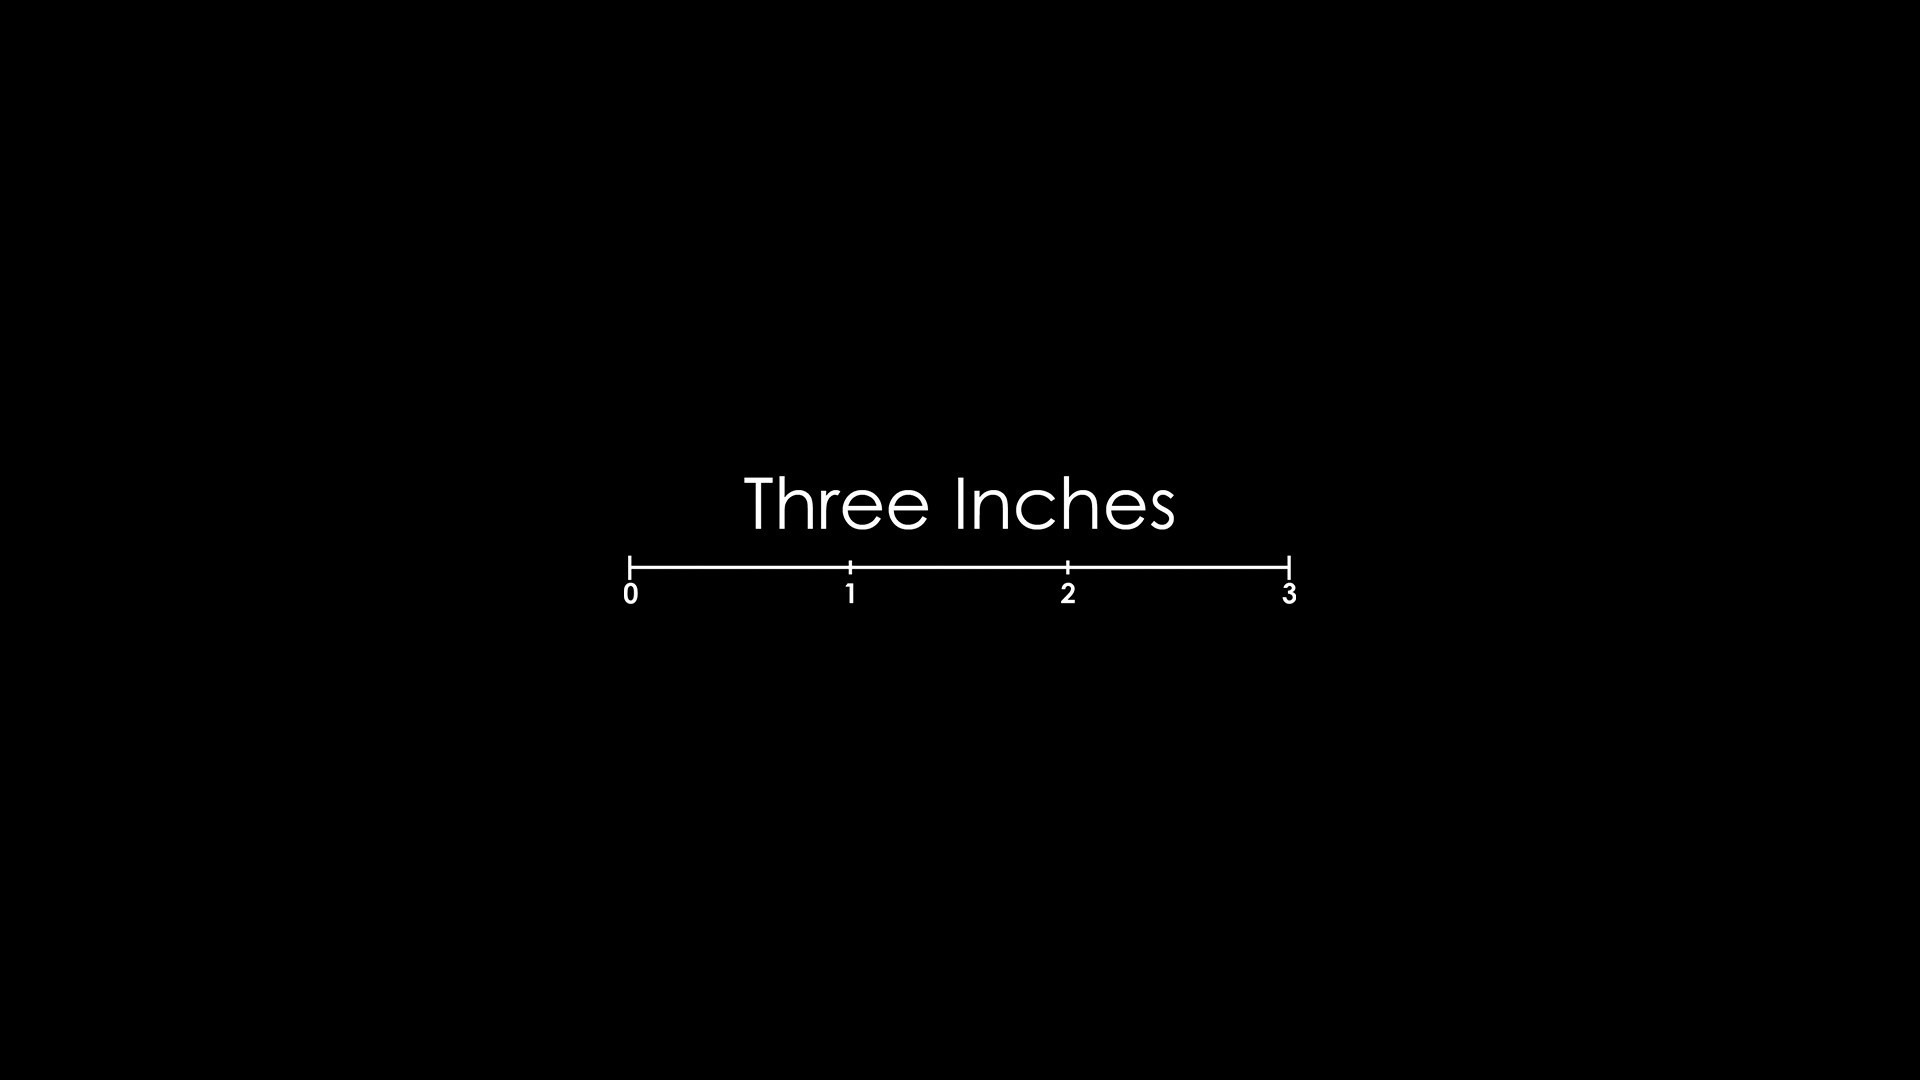 Show Three Inches